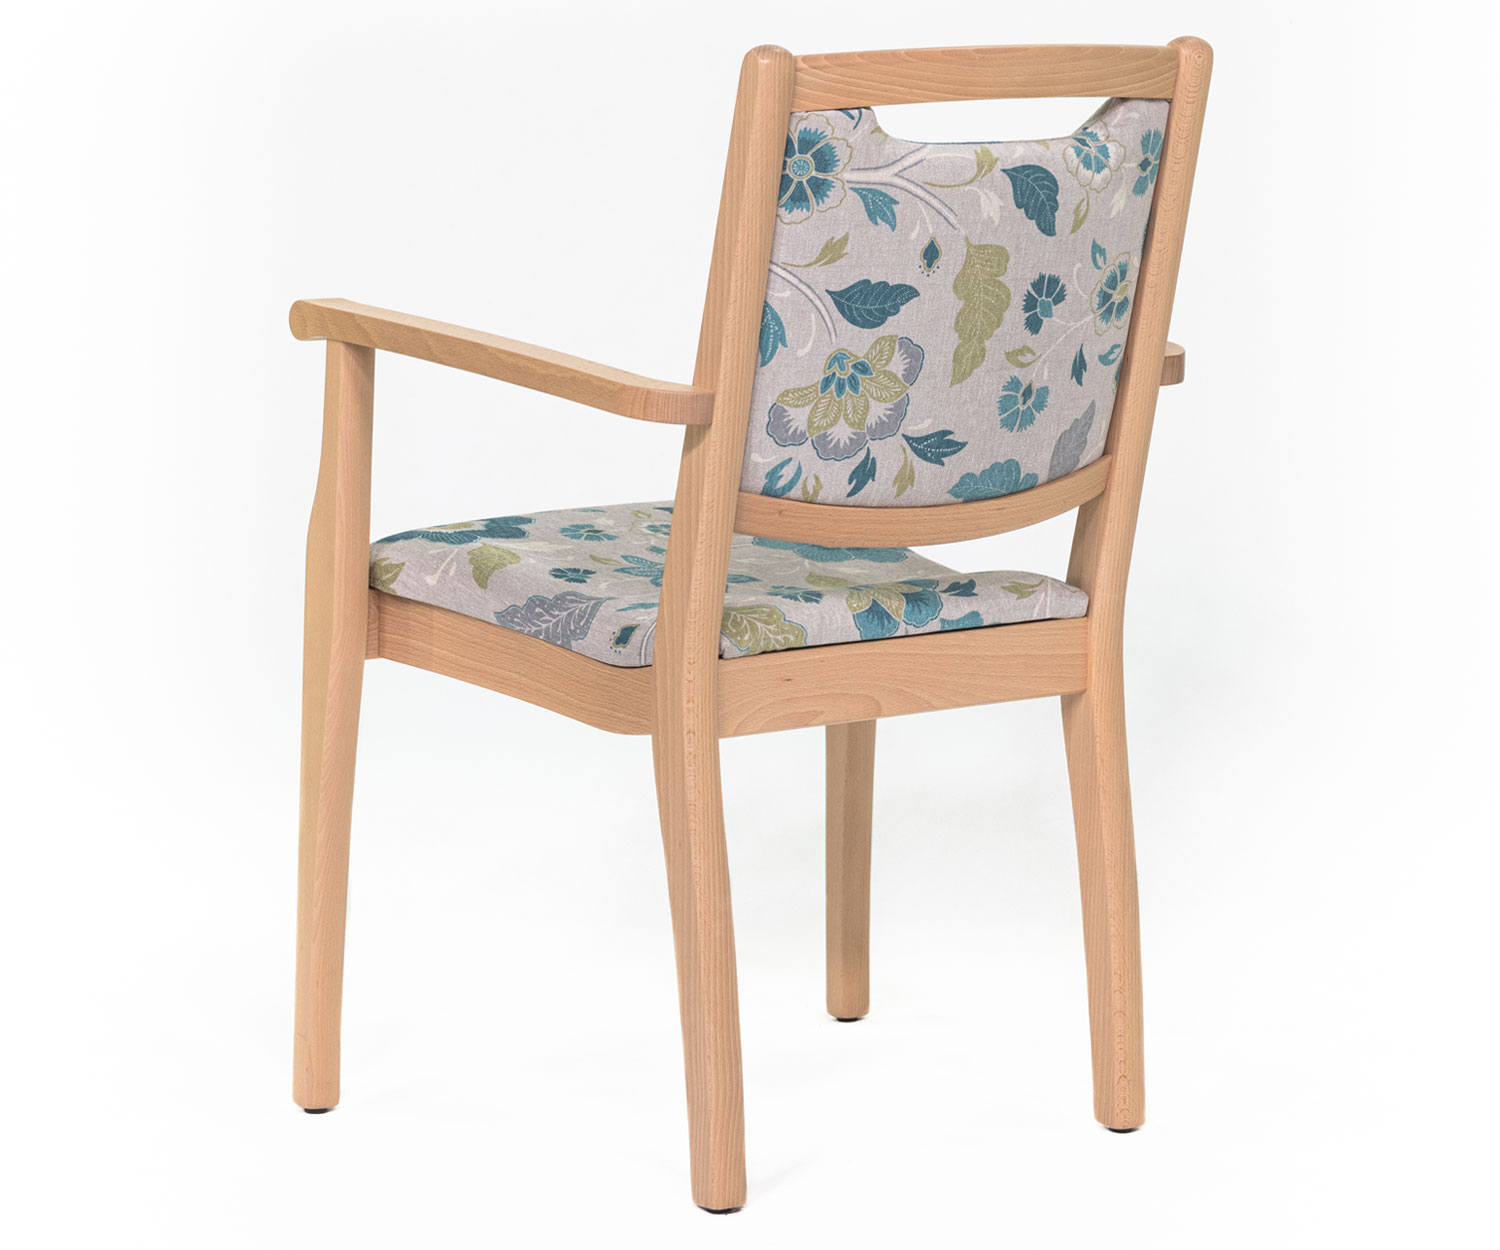 Remi dining armchair by FHG Australian Furniture Manufacturer